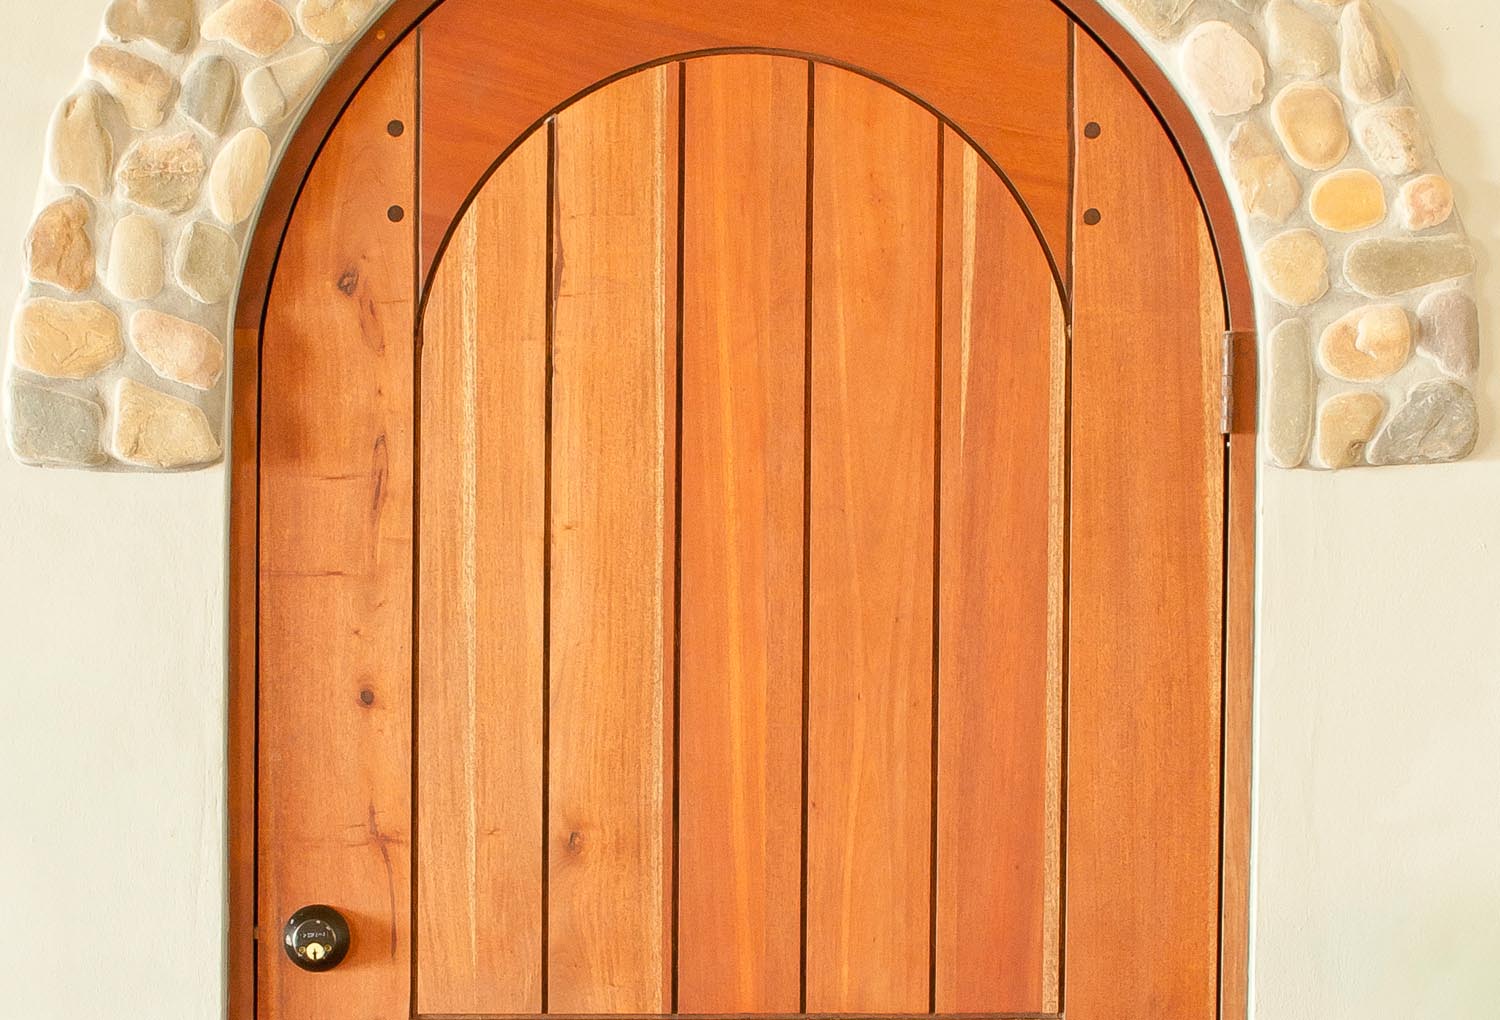 Full arch plank style mahogany door with wooden pegs